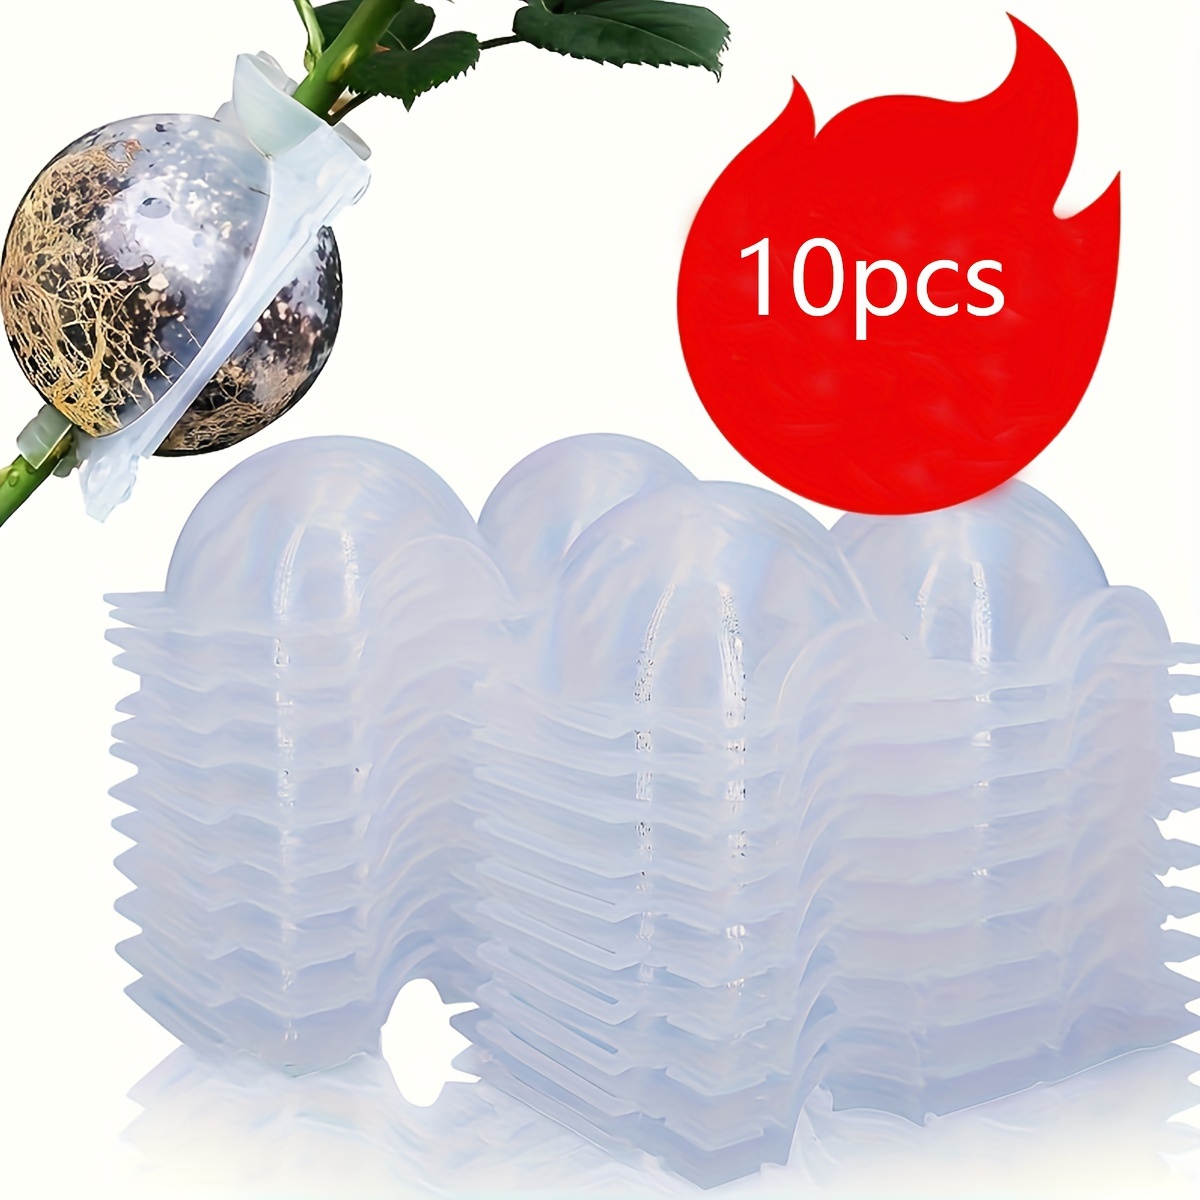 

10-piece Reusable Plant Rooting Grow Boxes - High-pressure, No-damage Grafting Balls For Quick Air Layering & Propagation